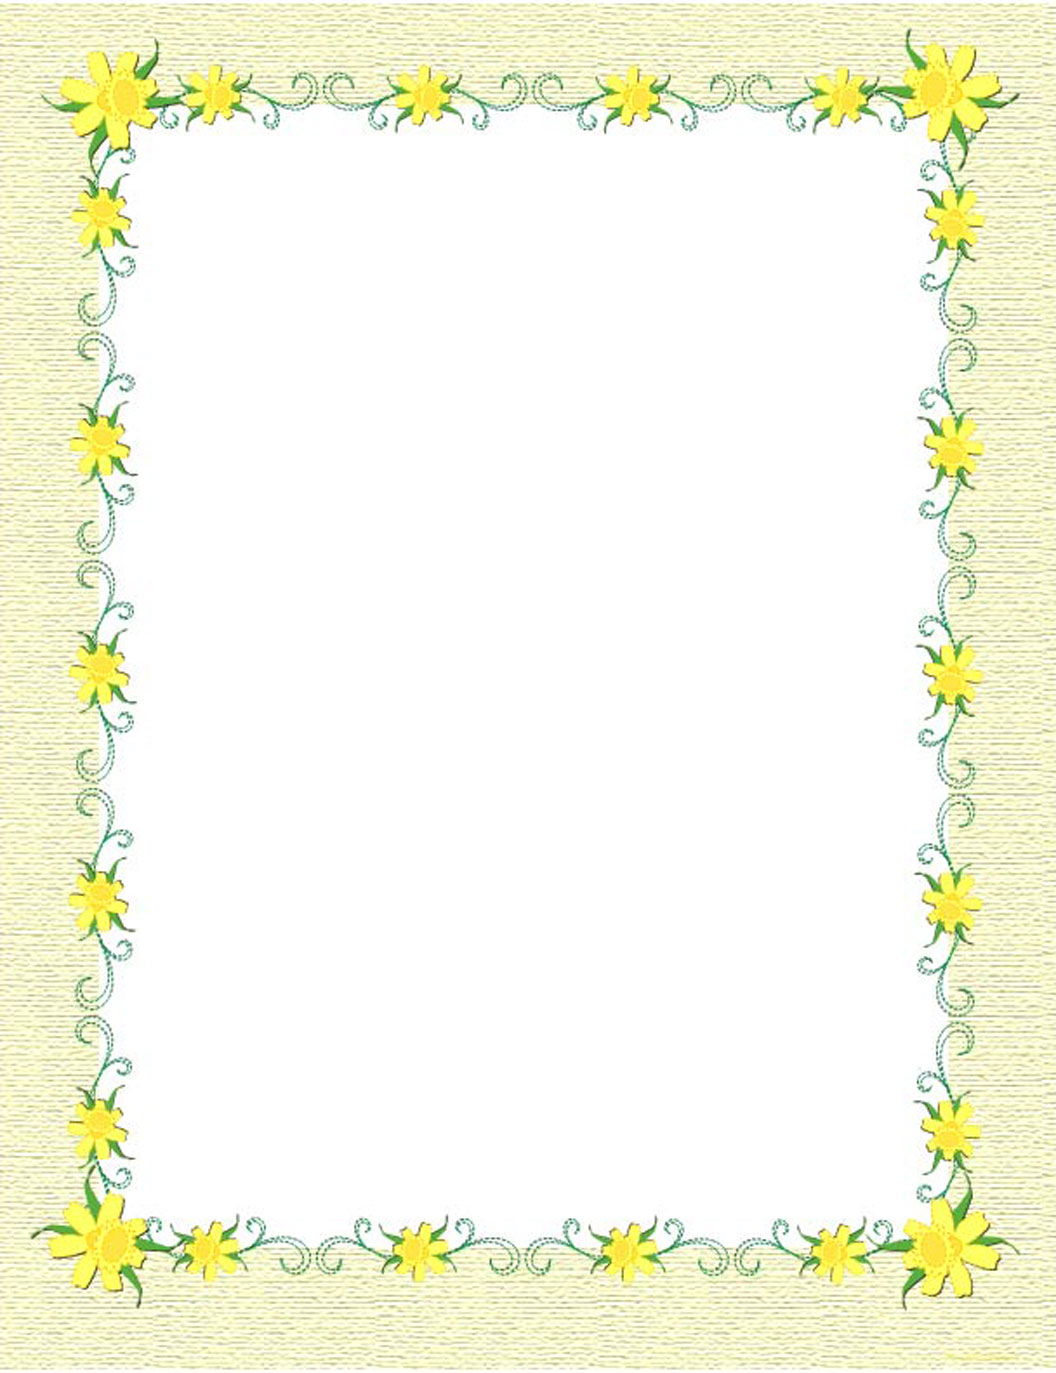 free clipart spring borders - photo #15